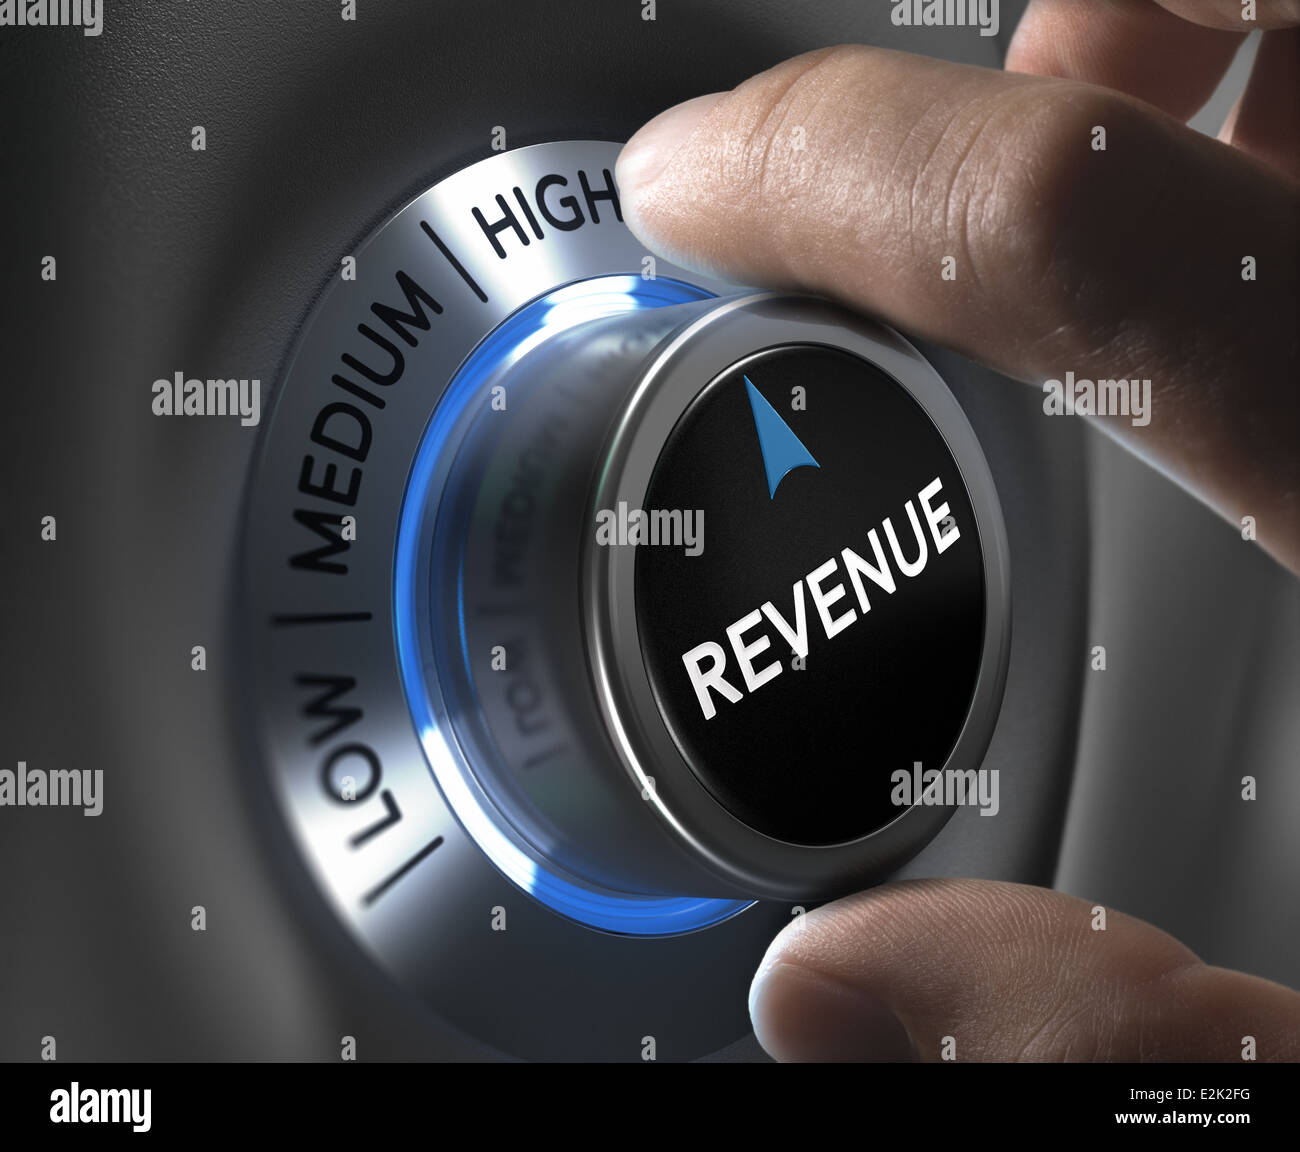 finger turning a revenue button to the highest position. Concept illustration of financial profits. Stock Photo